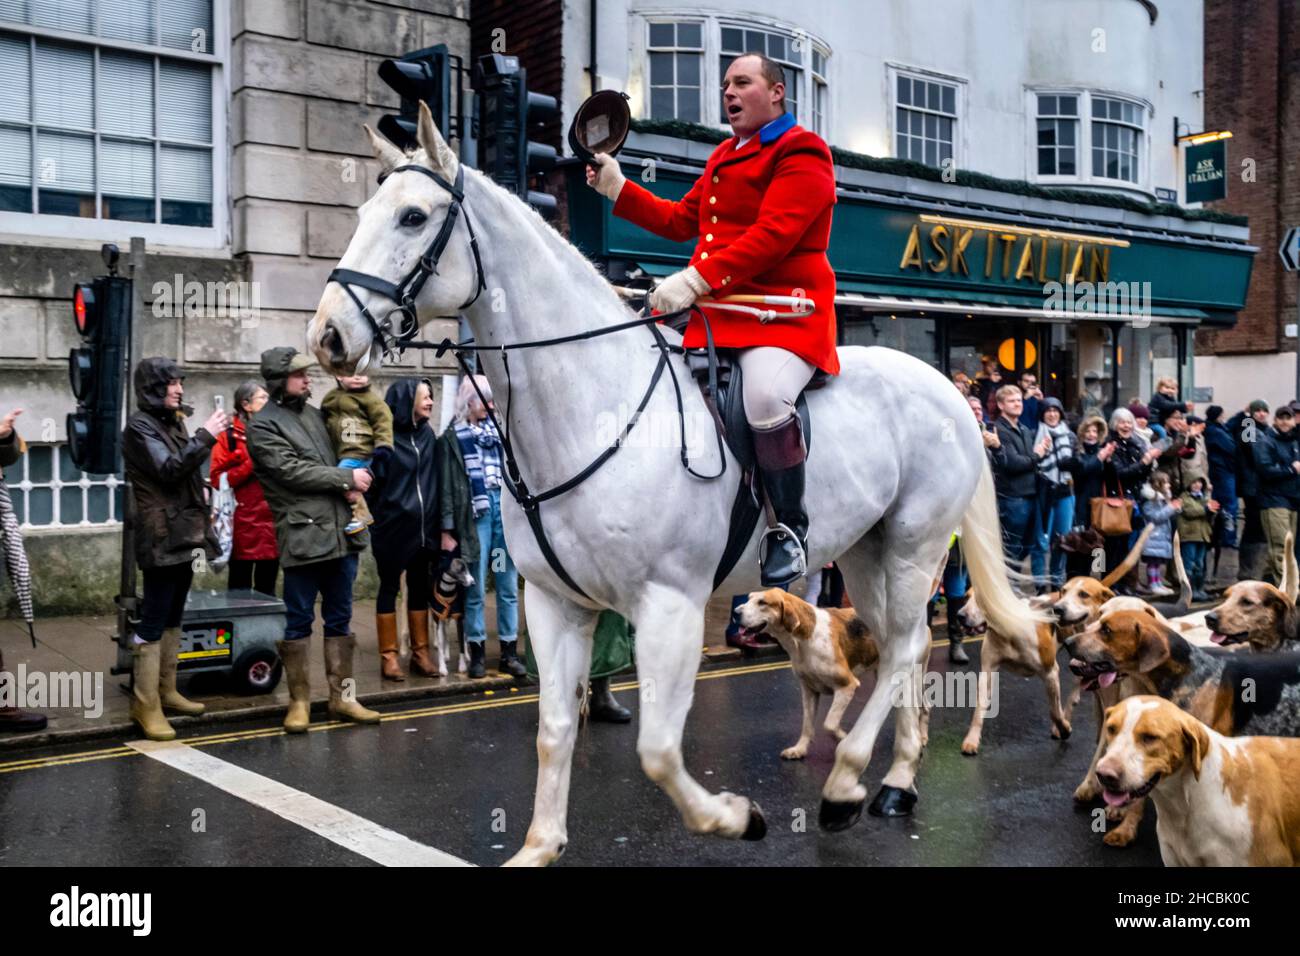 Lewes, UK. 27th Dec, 2021. The Southdown and Eridge Hunt arrive in Lewes High Street for their annual Boxing Day meeting, The event was switched this year to the 27th as Boxing Day fell on the Sunday. Credit: Grant Rooney/Alamy Live News Stock Photo